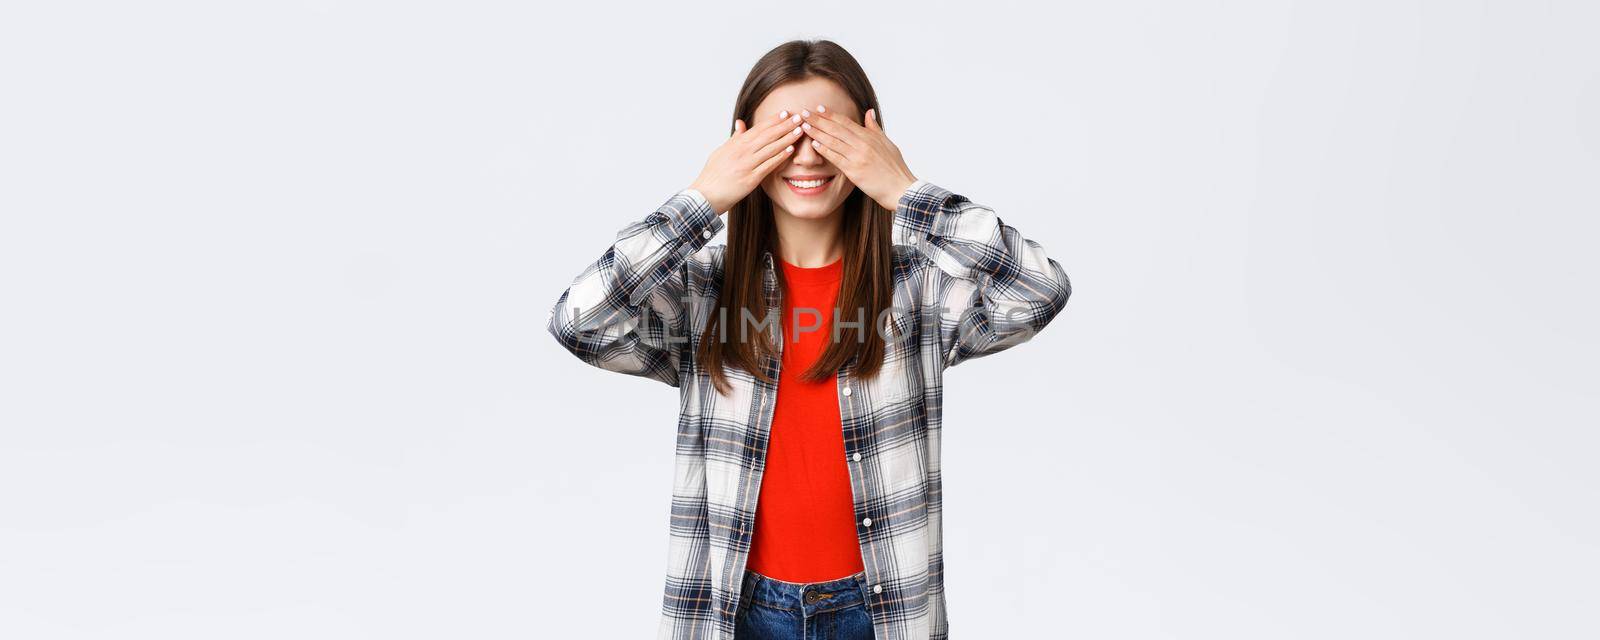 Lifestyle, different emotions, leisure activities concept. Excited happy young relaxed girl promise not peek. Woman cover eyes with palms, playing hide n seek or waiting for surprise.